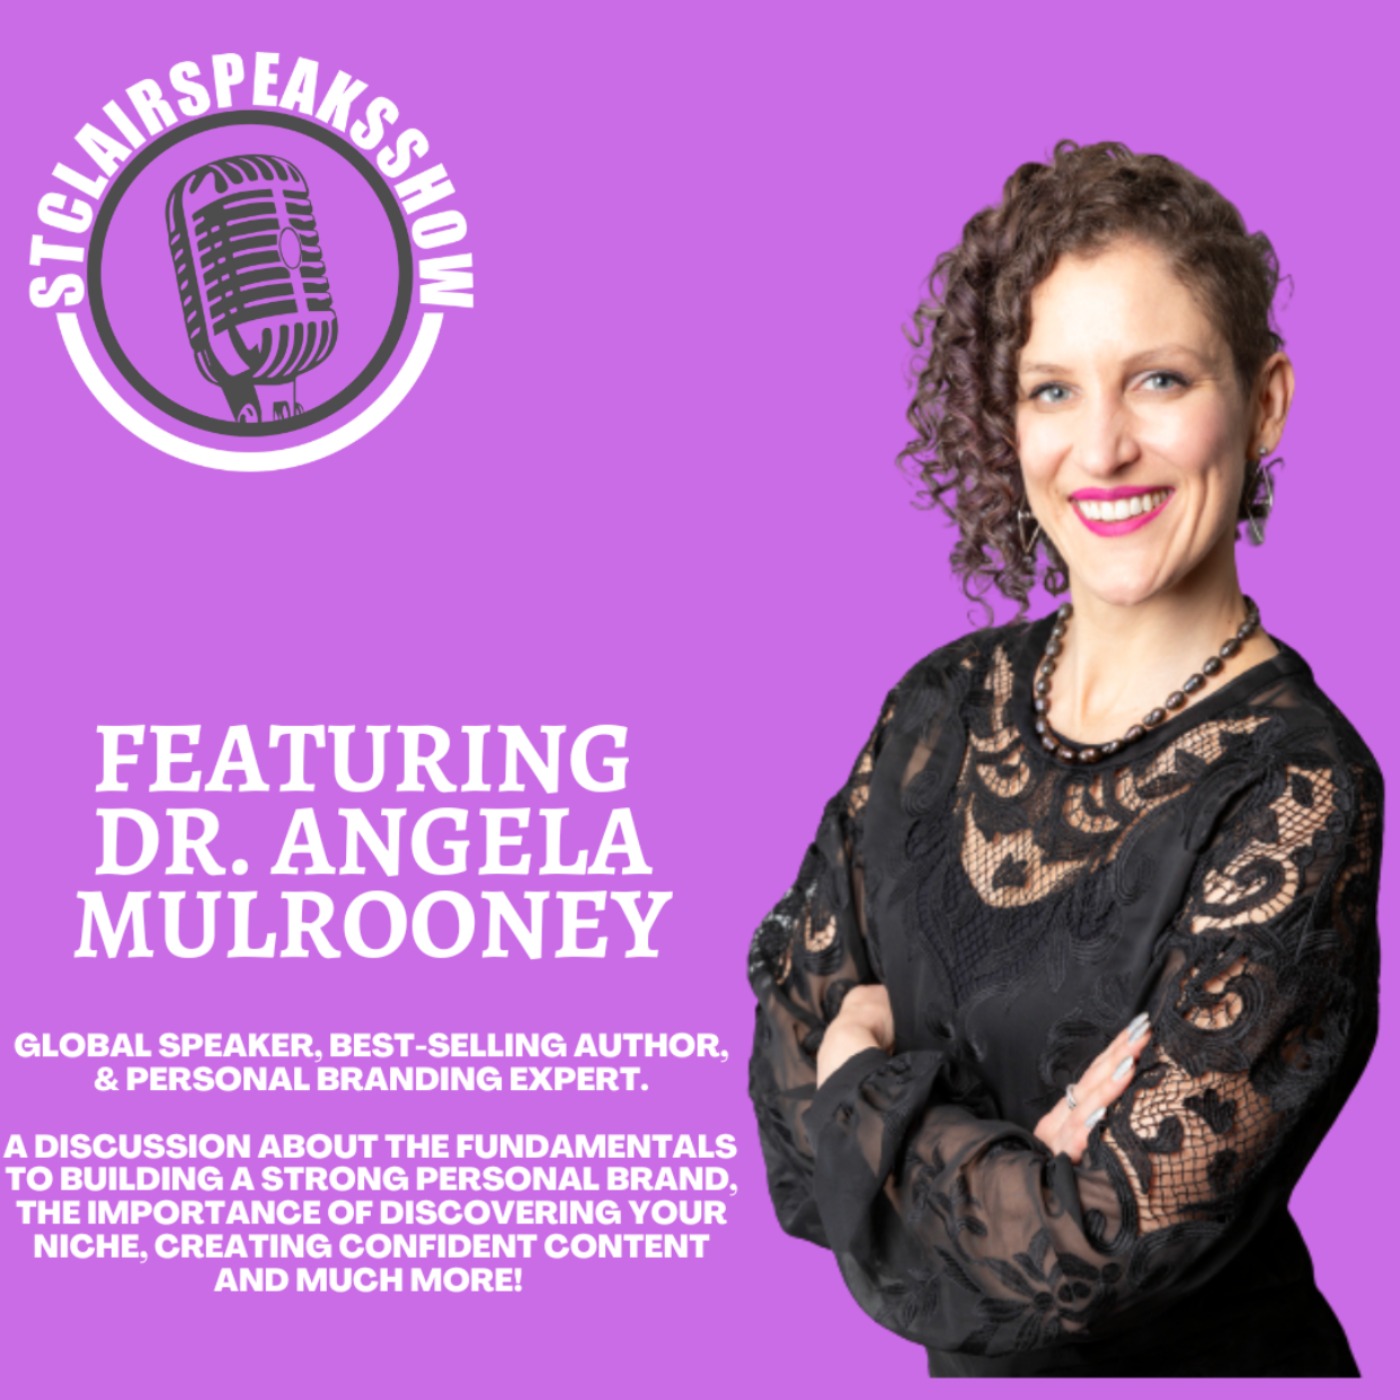 The fundamentals to building a strong personal brand featuring Dr. Angela Mulrooney Image